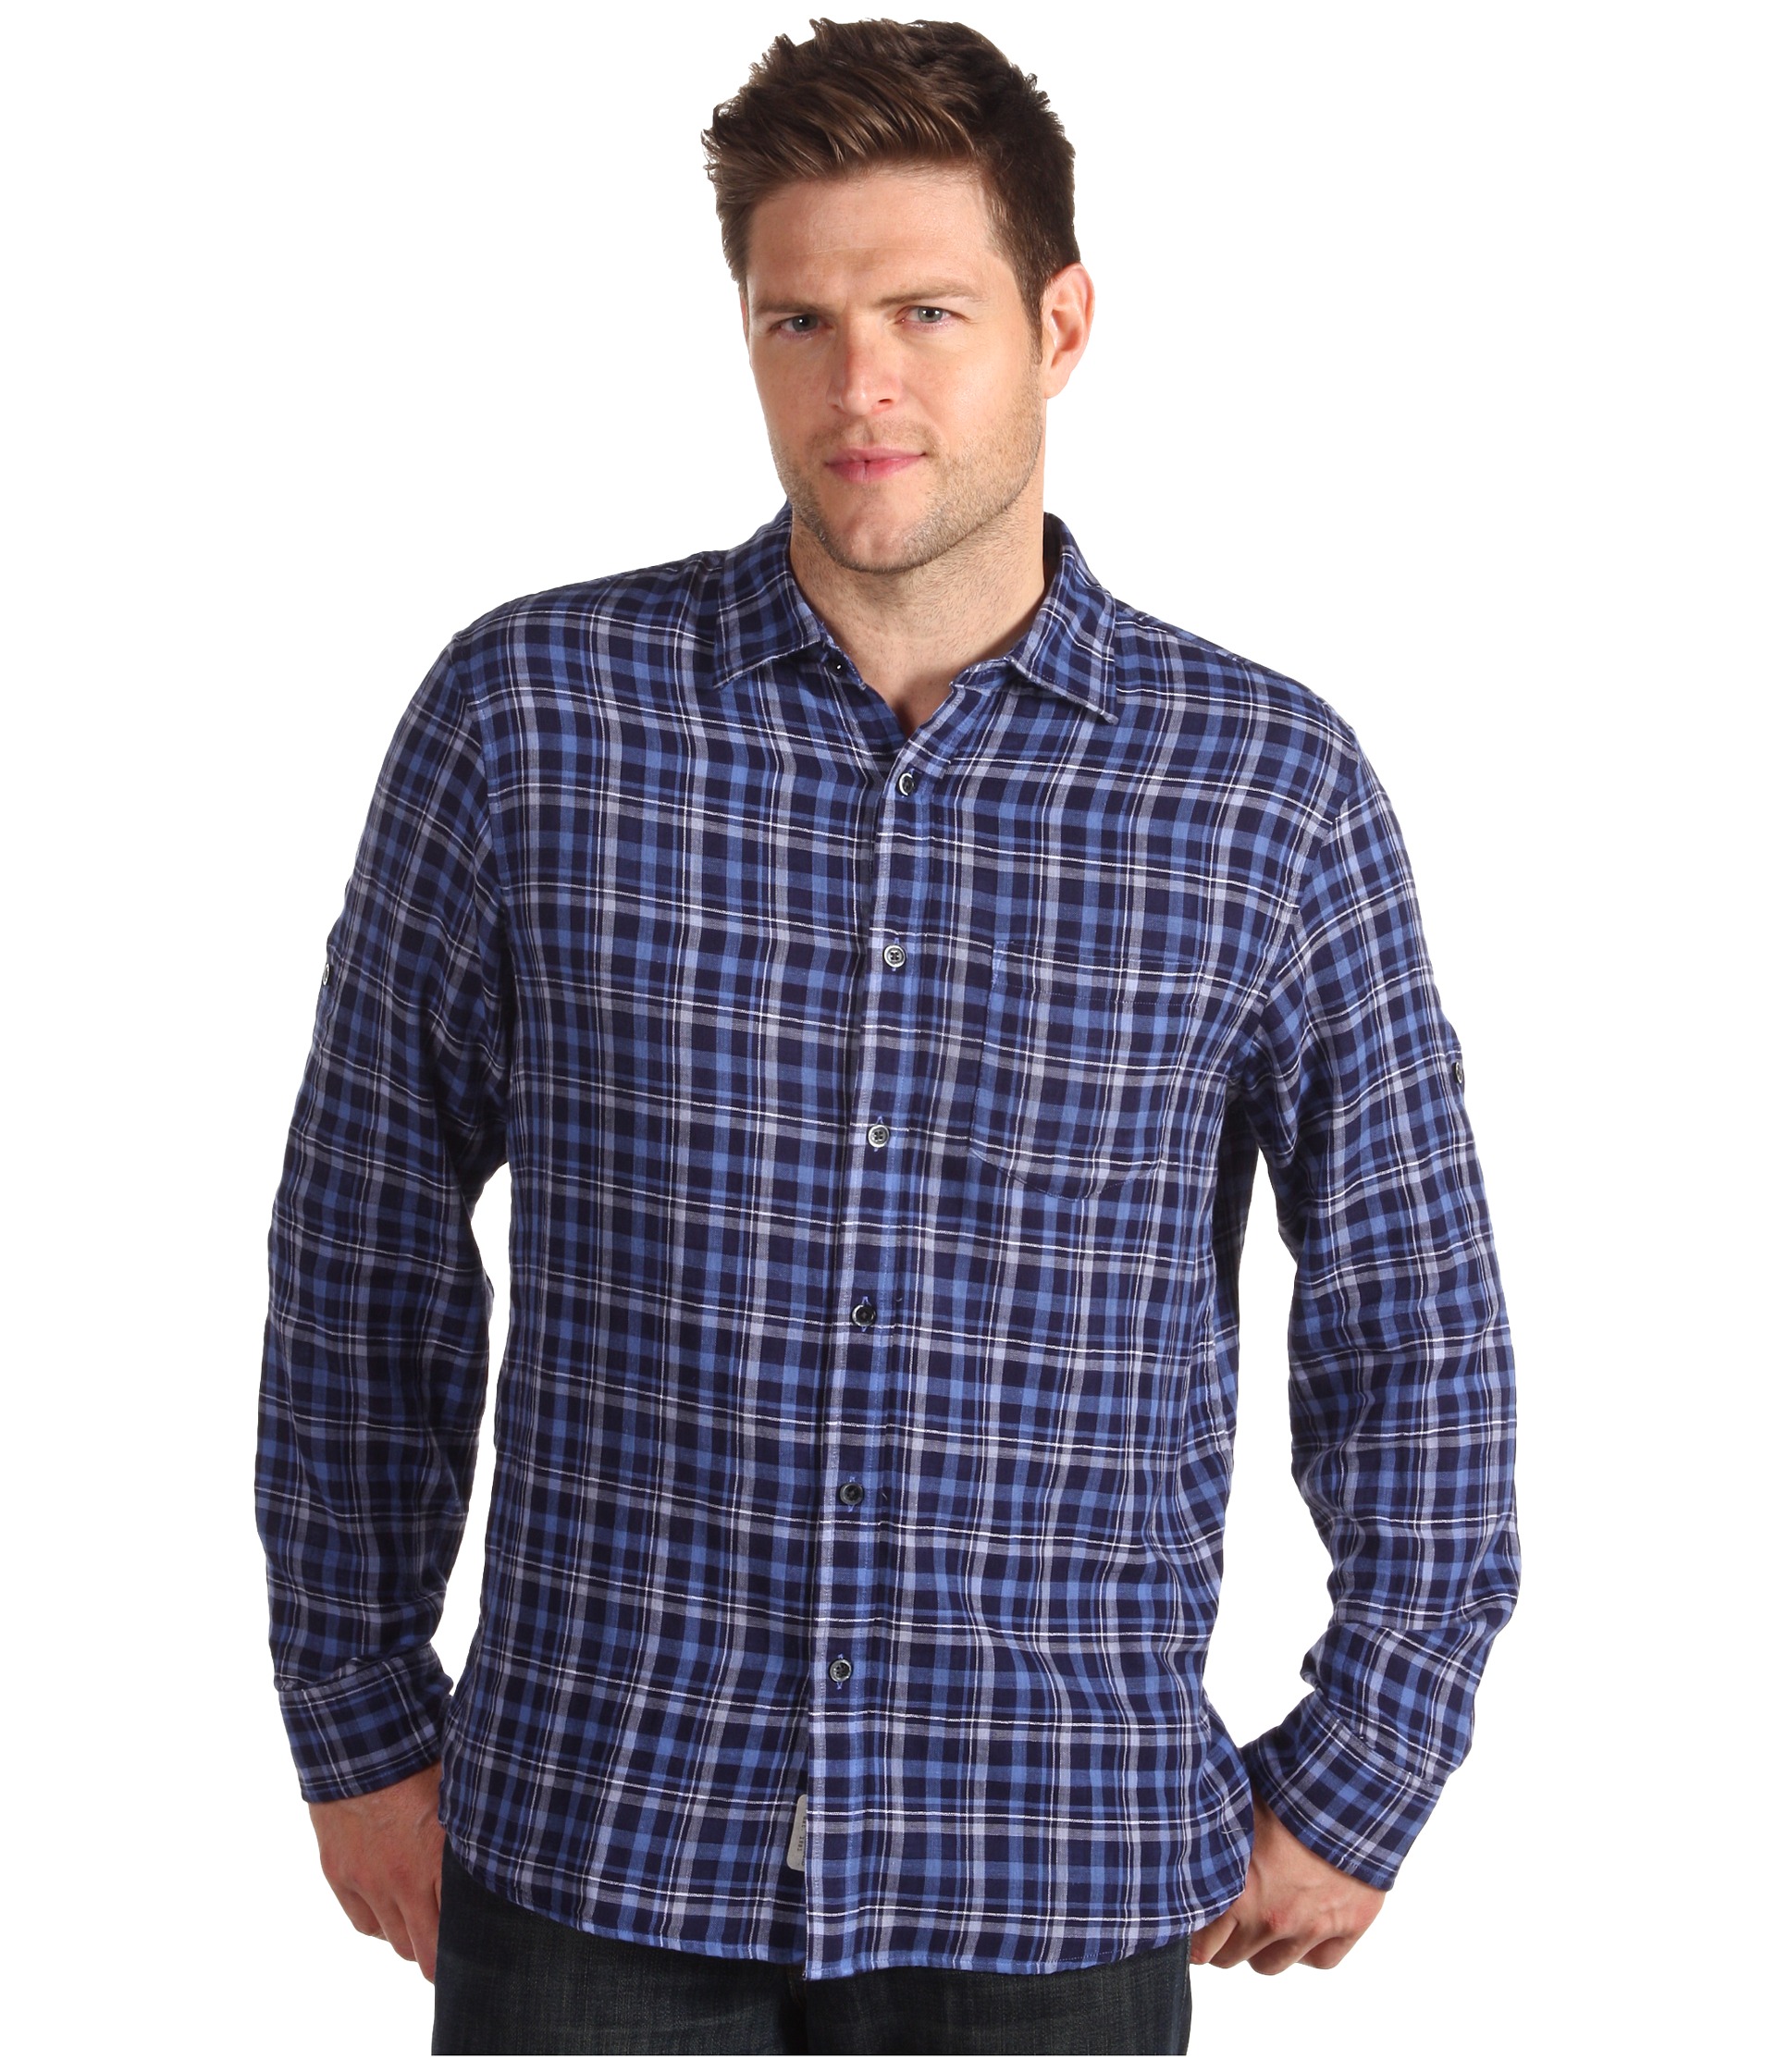 Michael Kors Double Faced Shirt $106.99 ( 45% off MSRP $195.00)